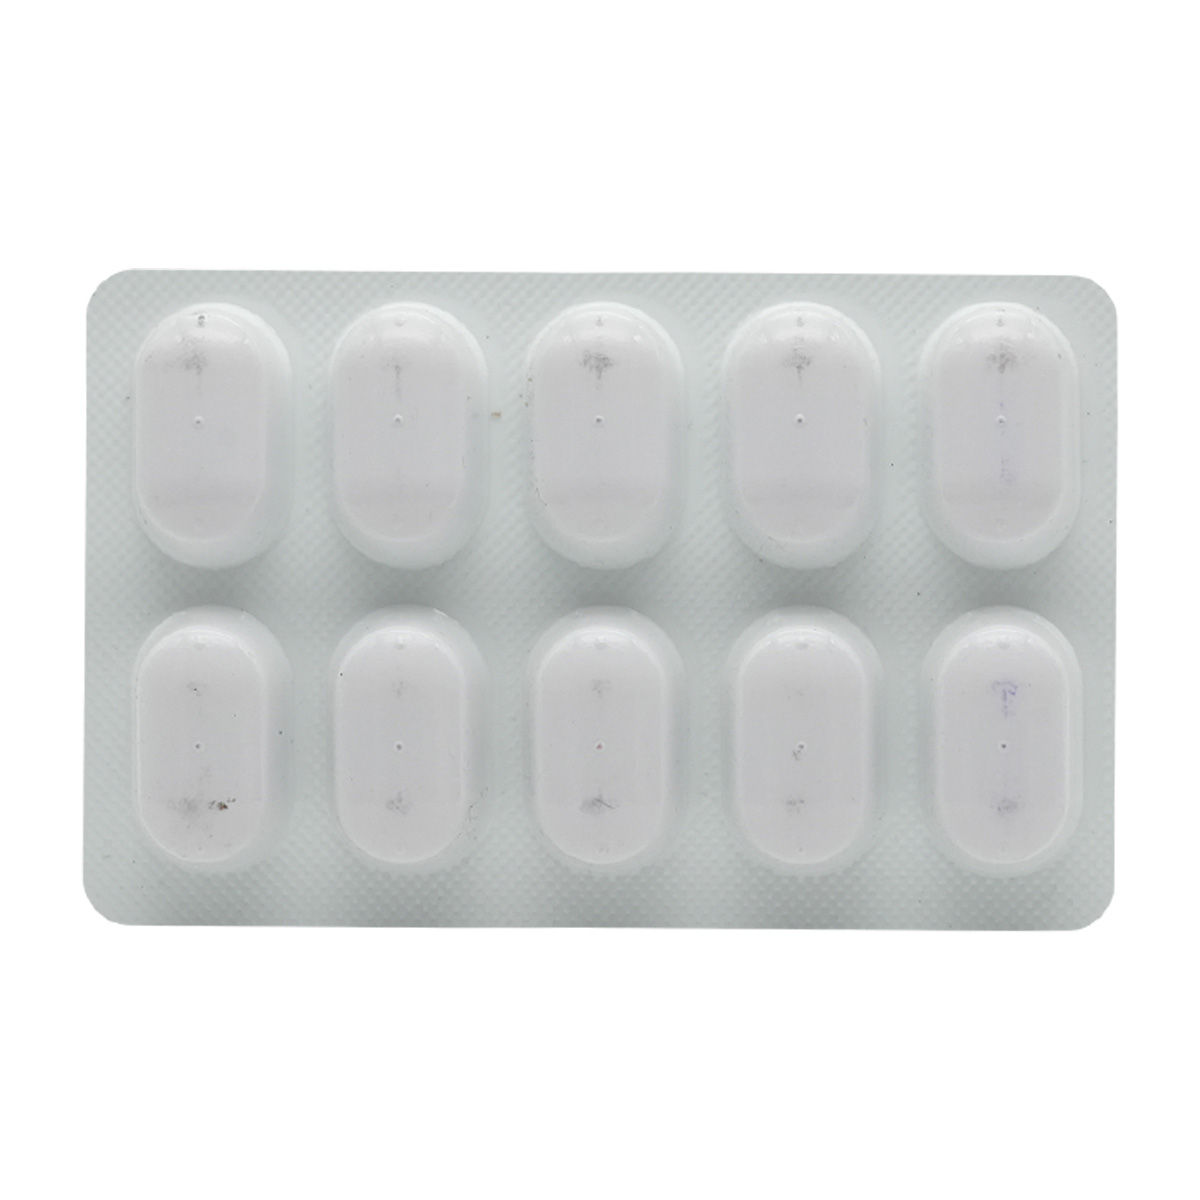 Alsita-M 50 Tablet 10's Price, Uses, Side Effects, Composition - Apollo ...